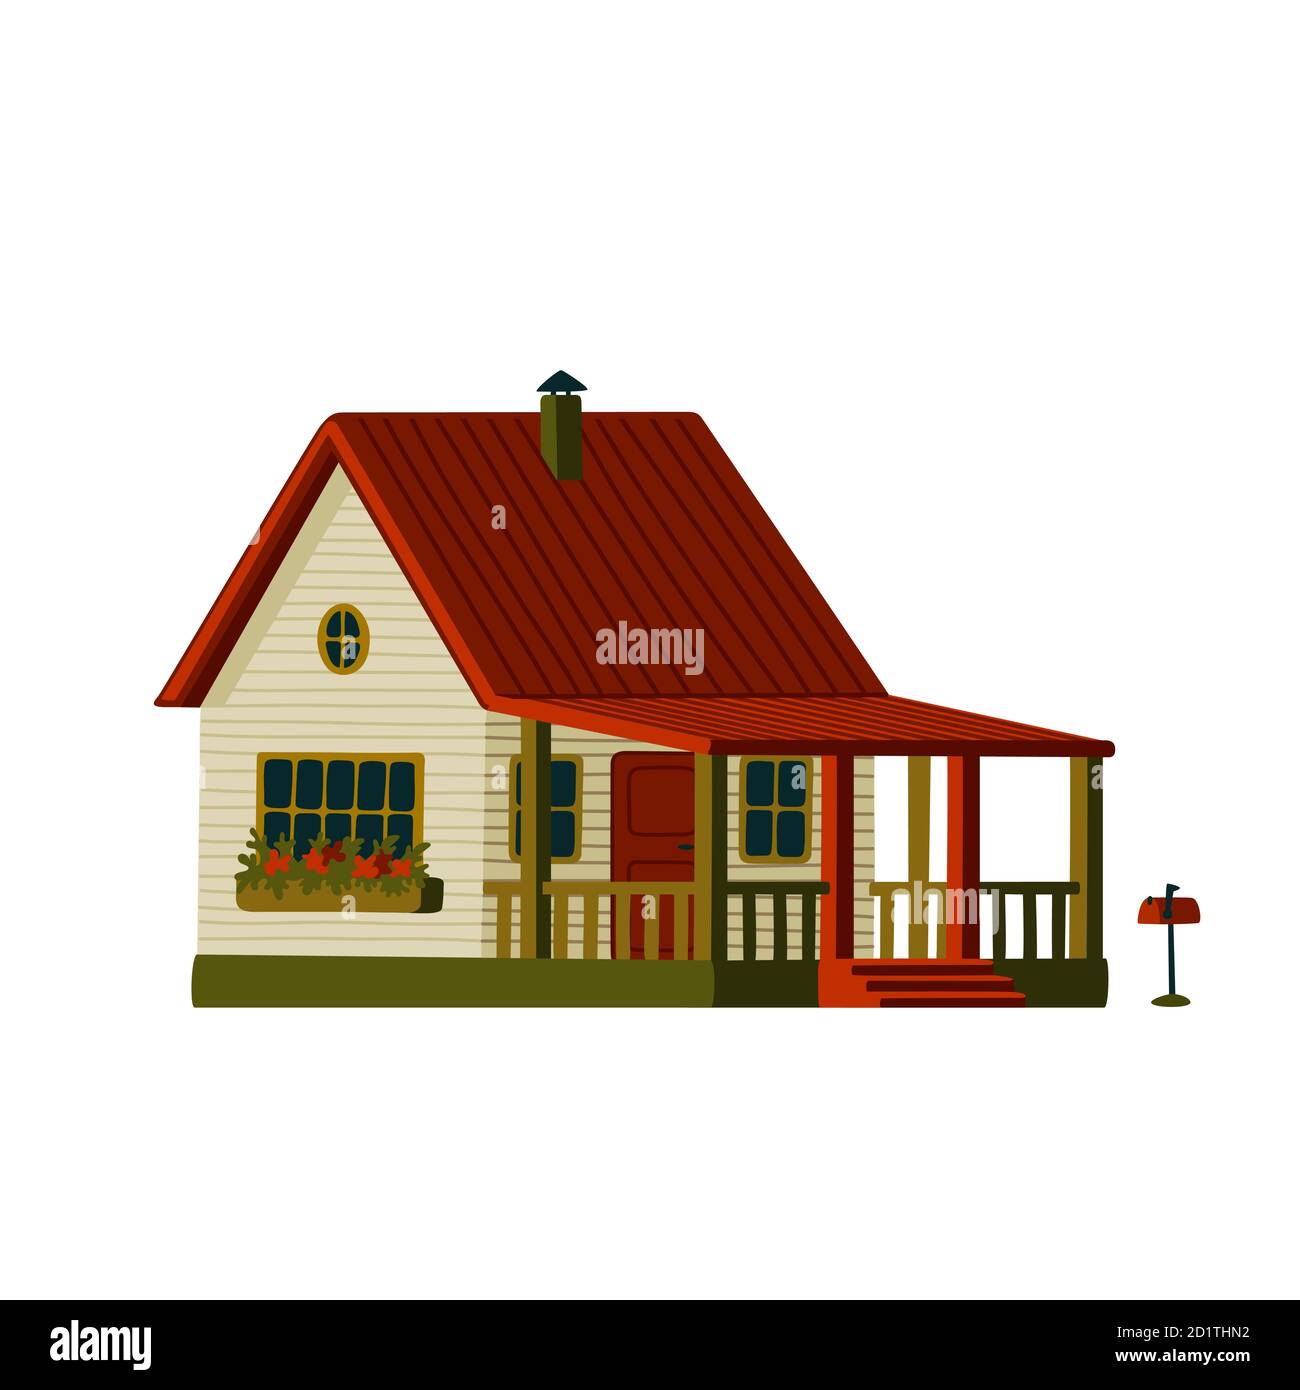 Country house with terrace. Wooden white house in rustic style with red roof Stock Vector